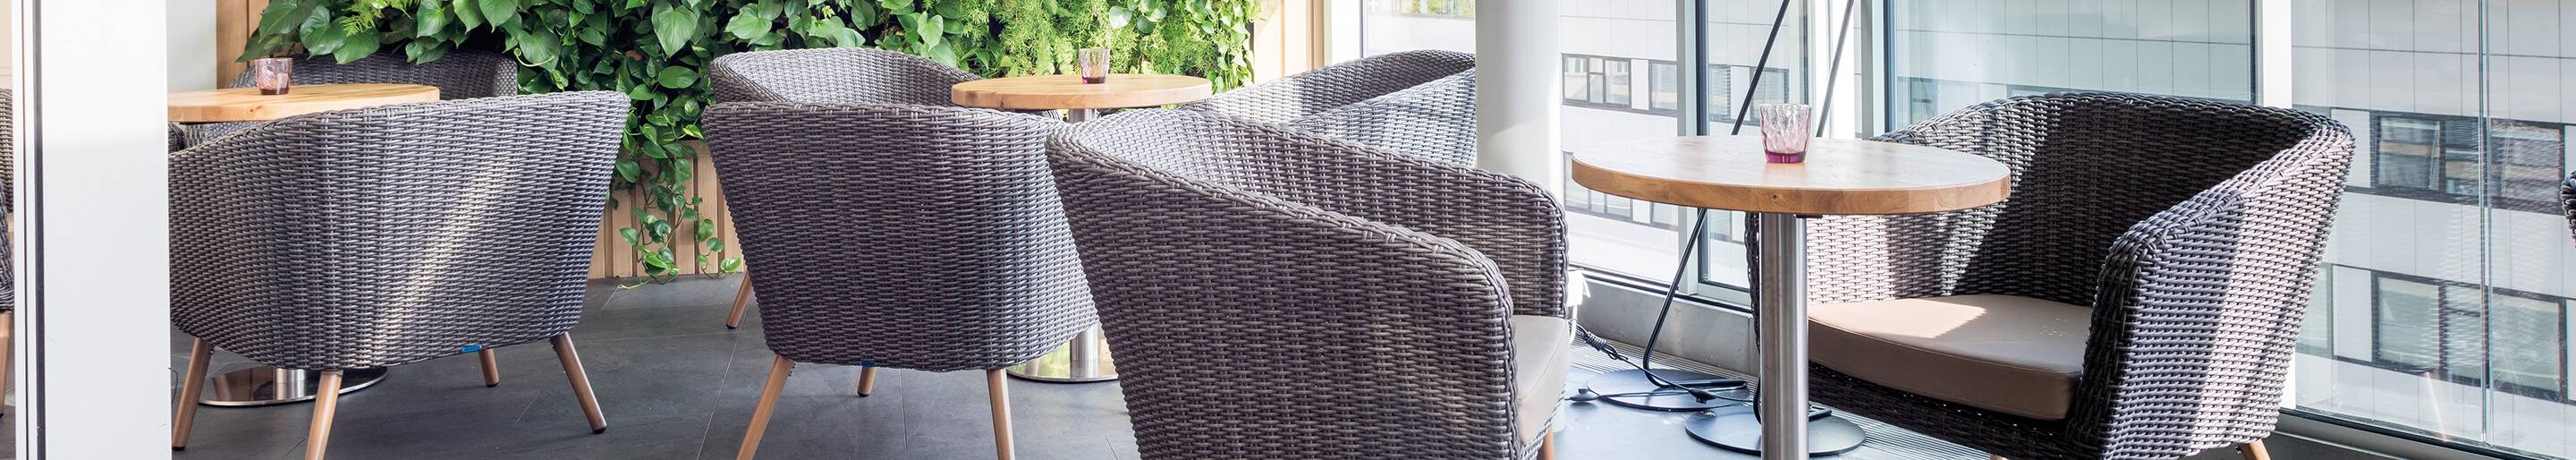 Outdoor Sofas for your restaurant or hotel